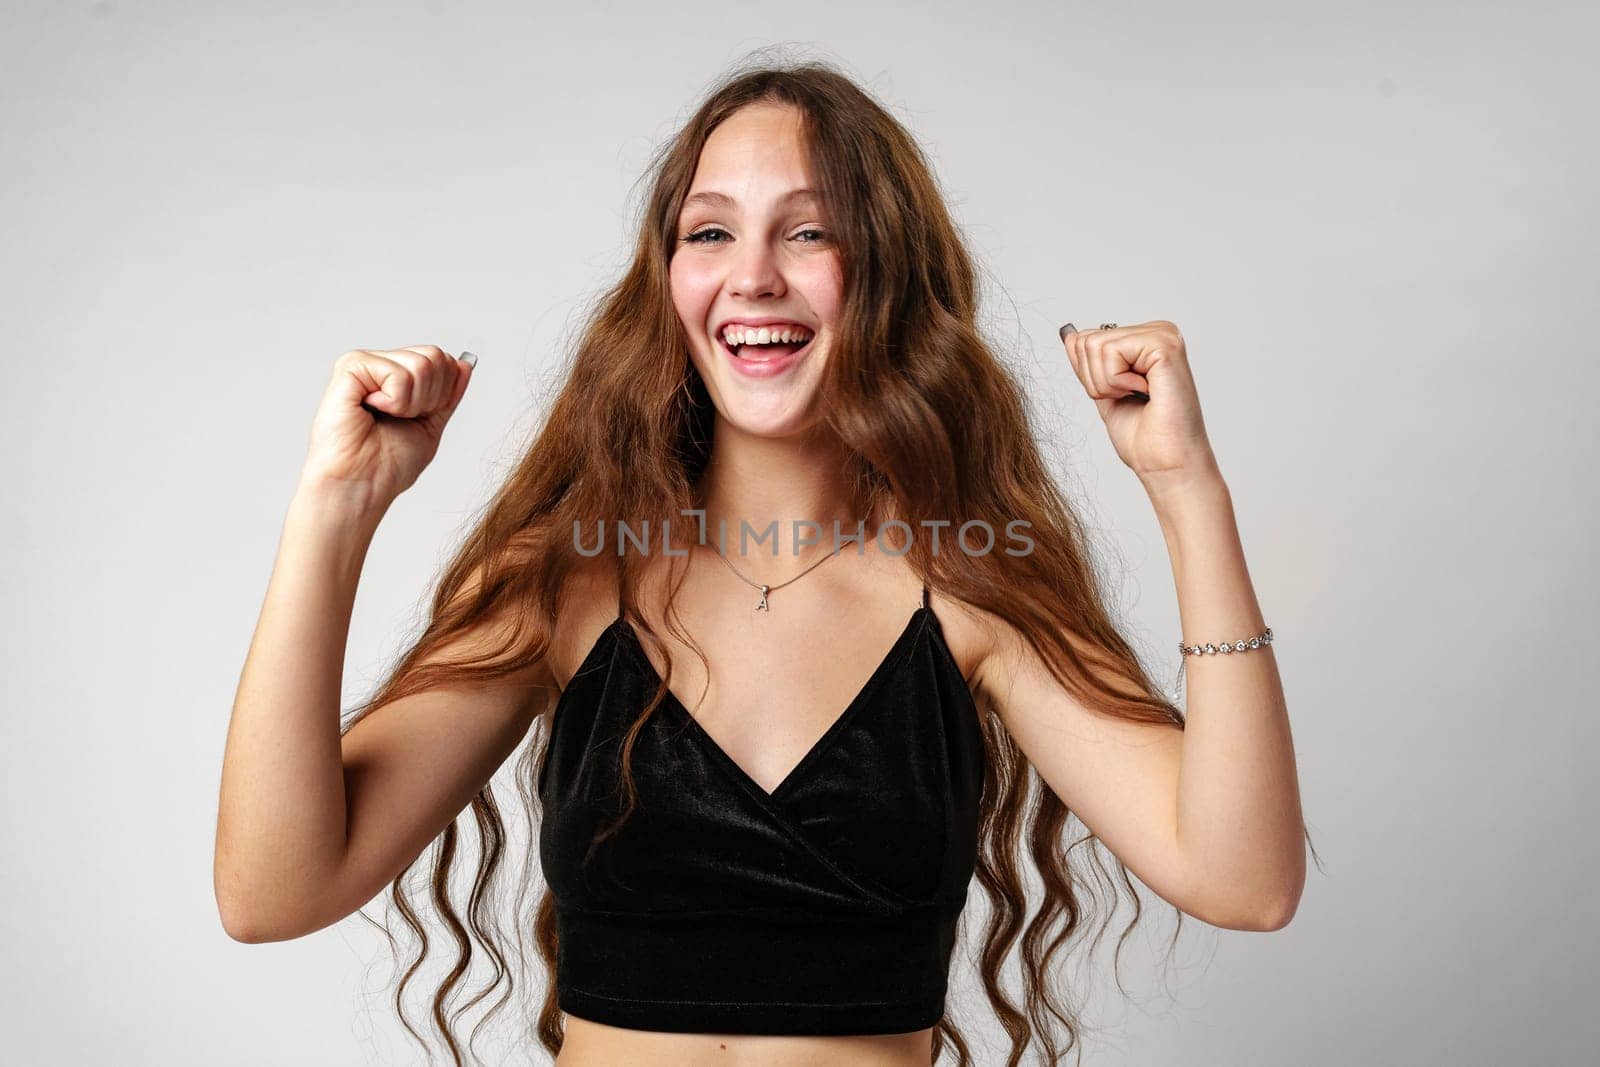 Young Woman Celebrating Victory With Raised Fists on a Plain Background by Fabrikasimf